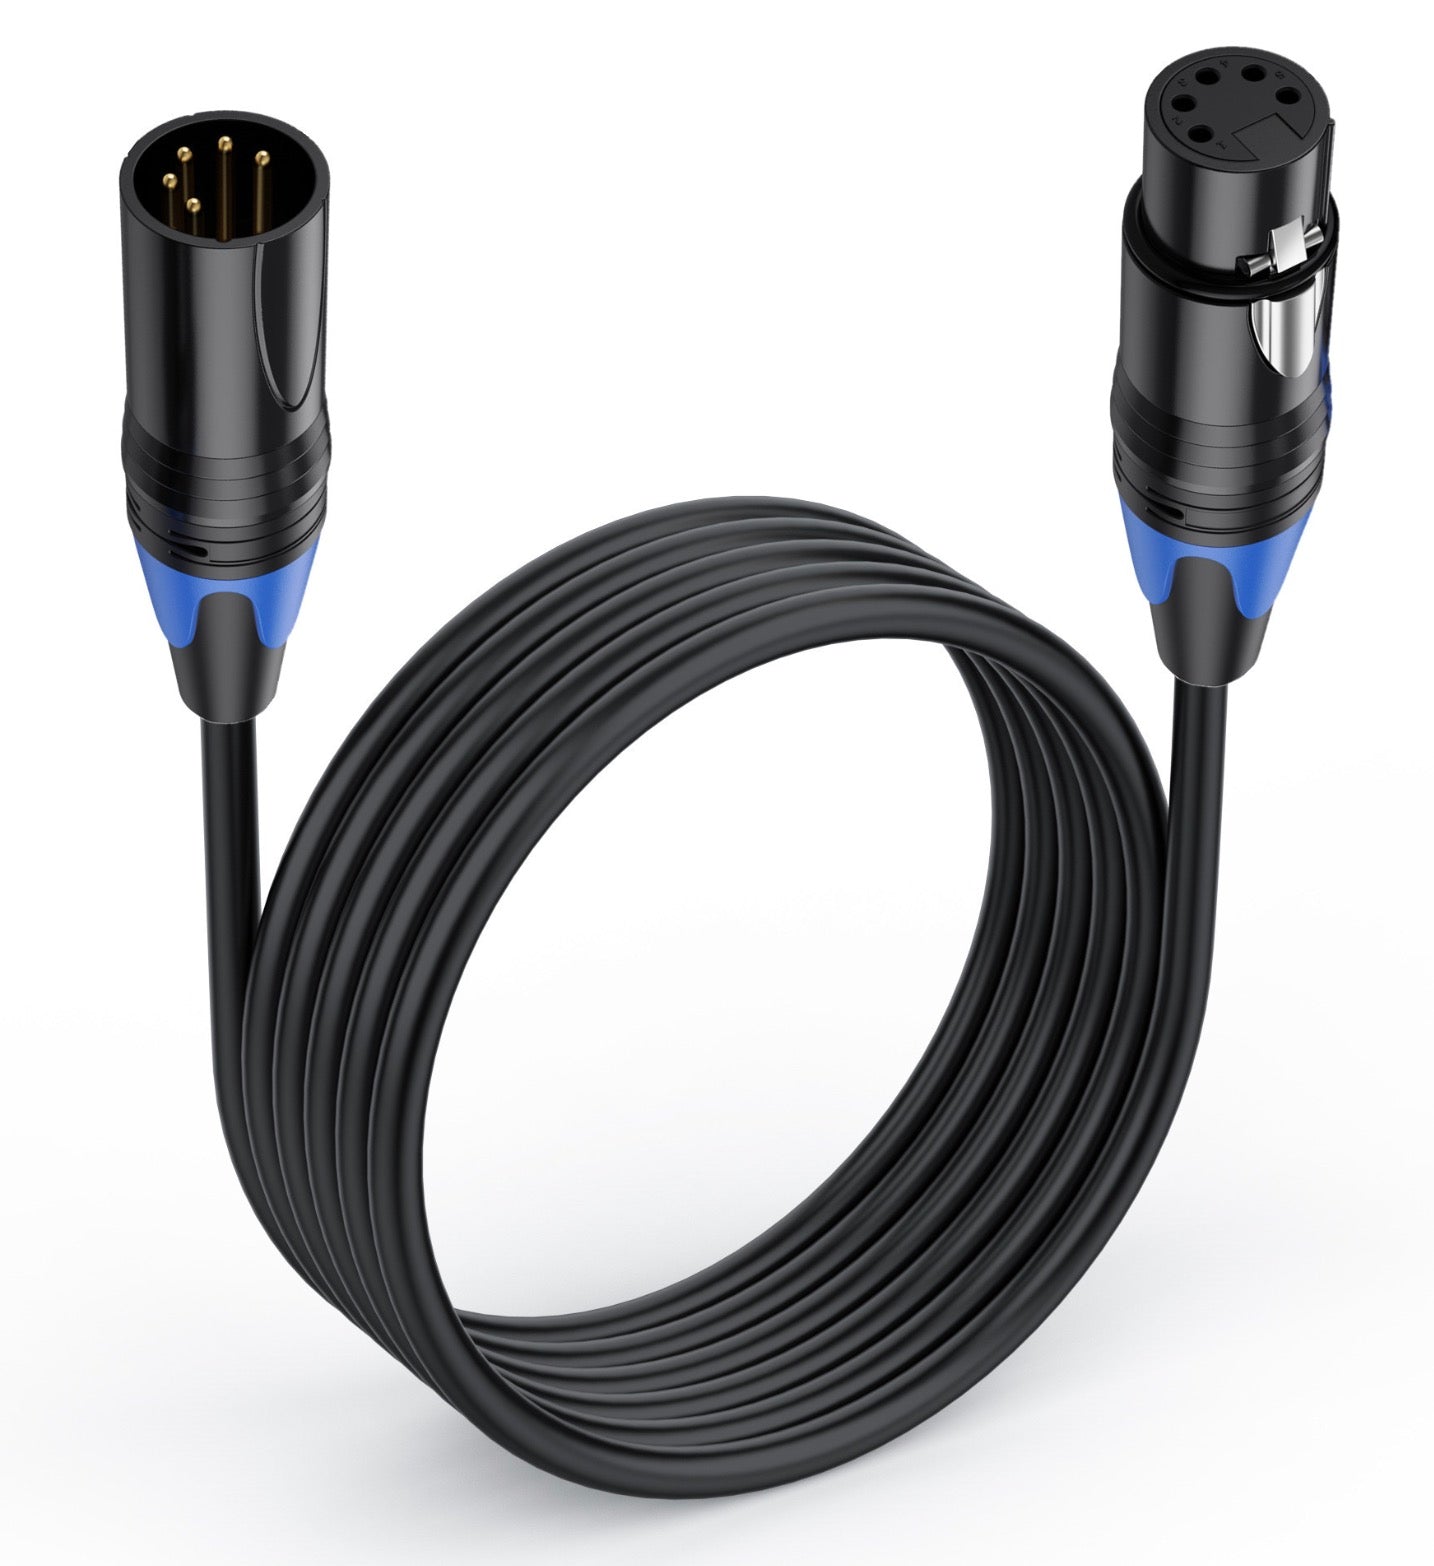 5 Pin XLR Male to Female DMX Cable For DMX512